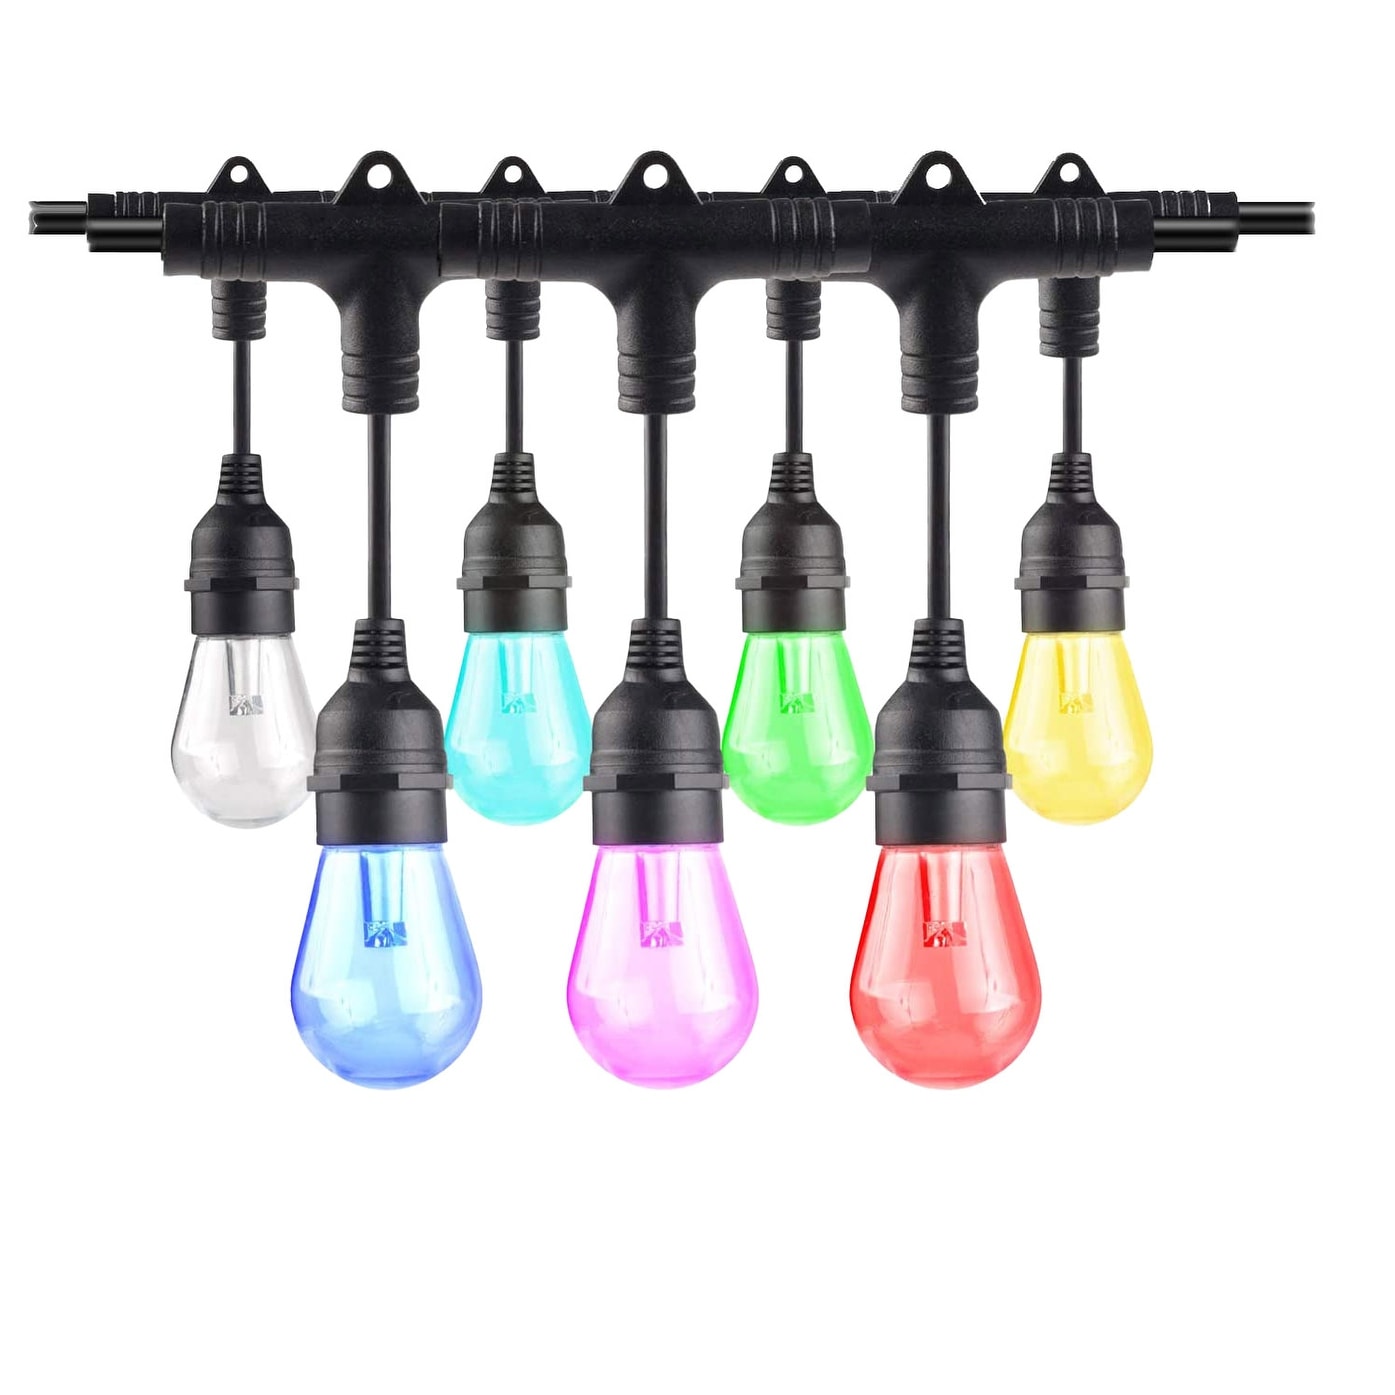 Bulbrite 36-foot Smart String Light Kit with Shatter Resistant RGB Color Changing LED Light Bulbs - Multicolored